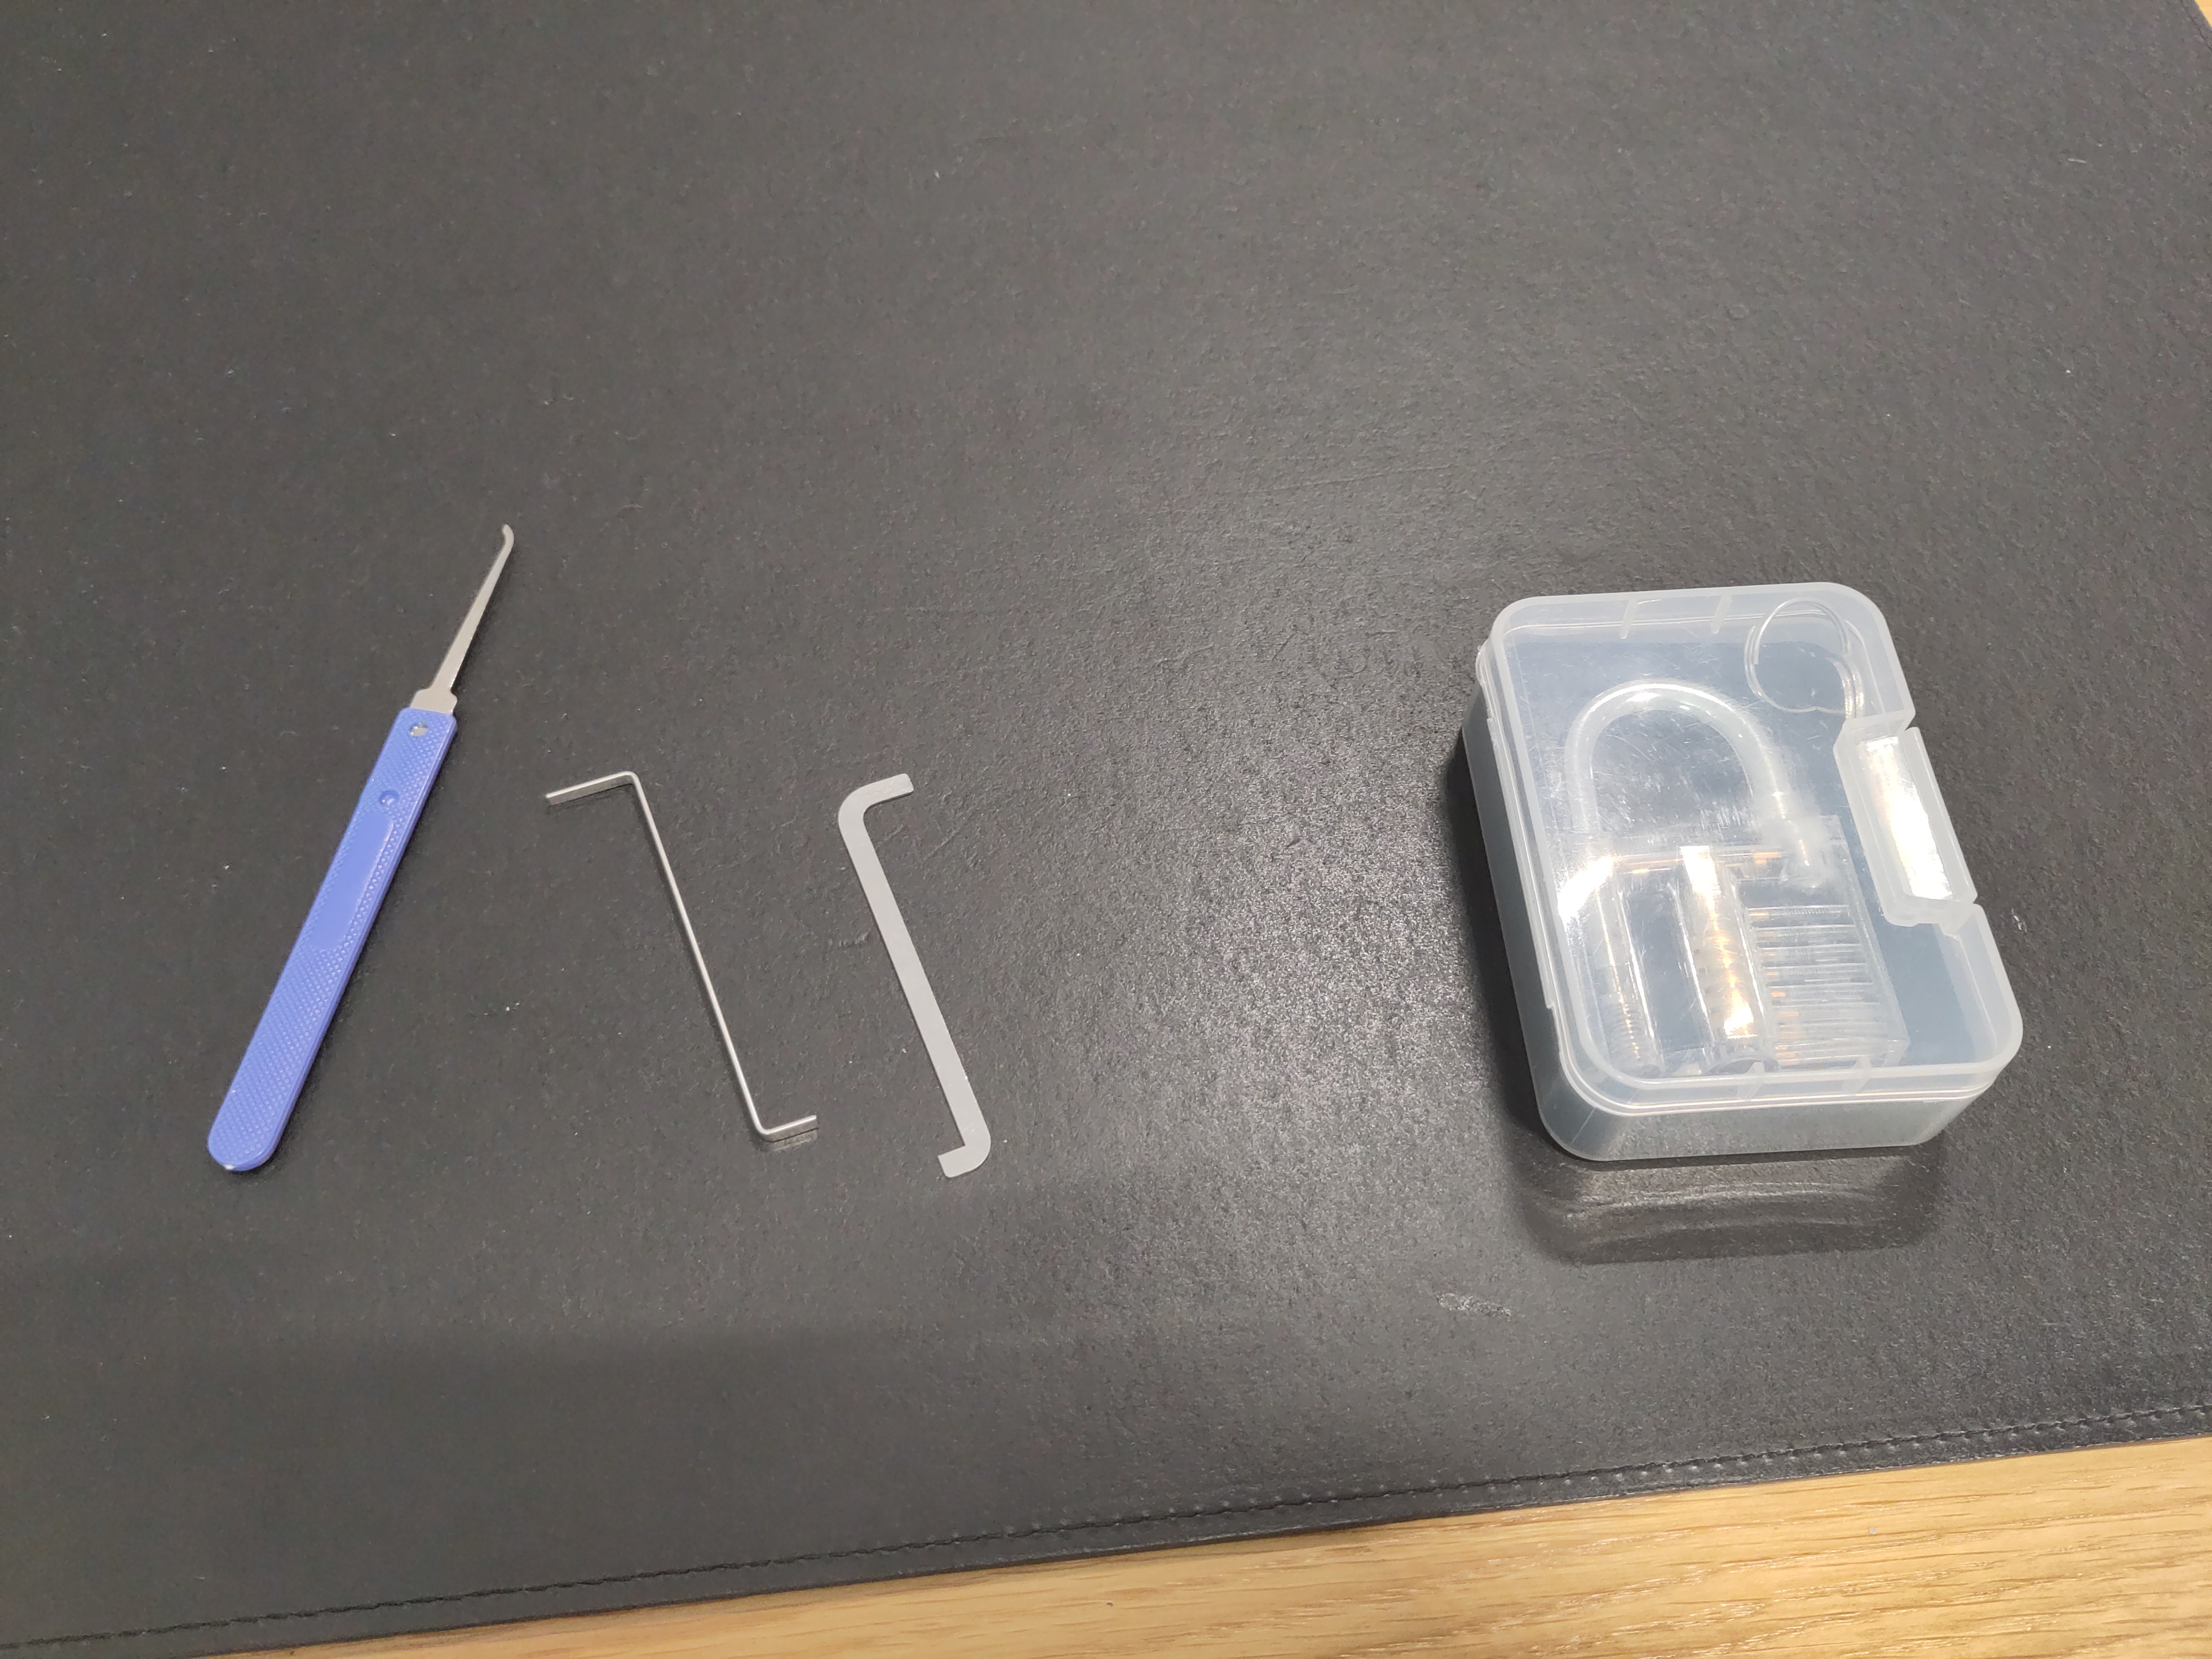 A lockpick and two tensioners on a table, along with a plastic box with a see-through training lock inside. 